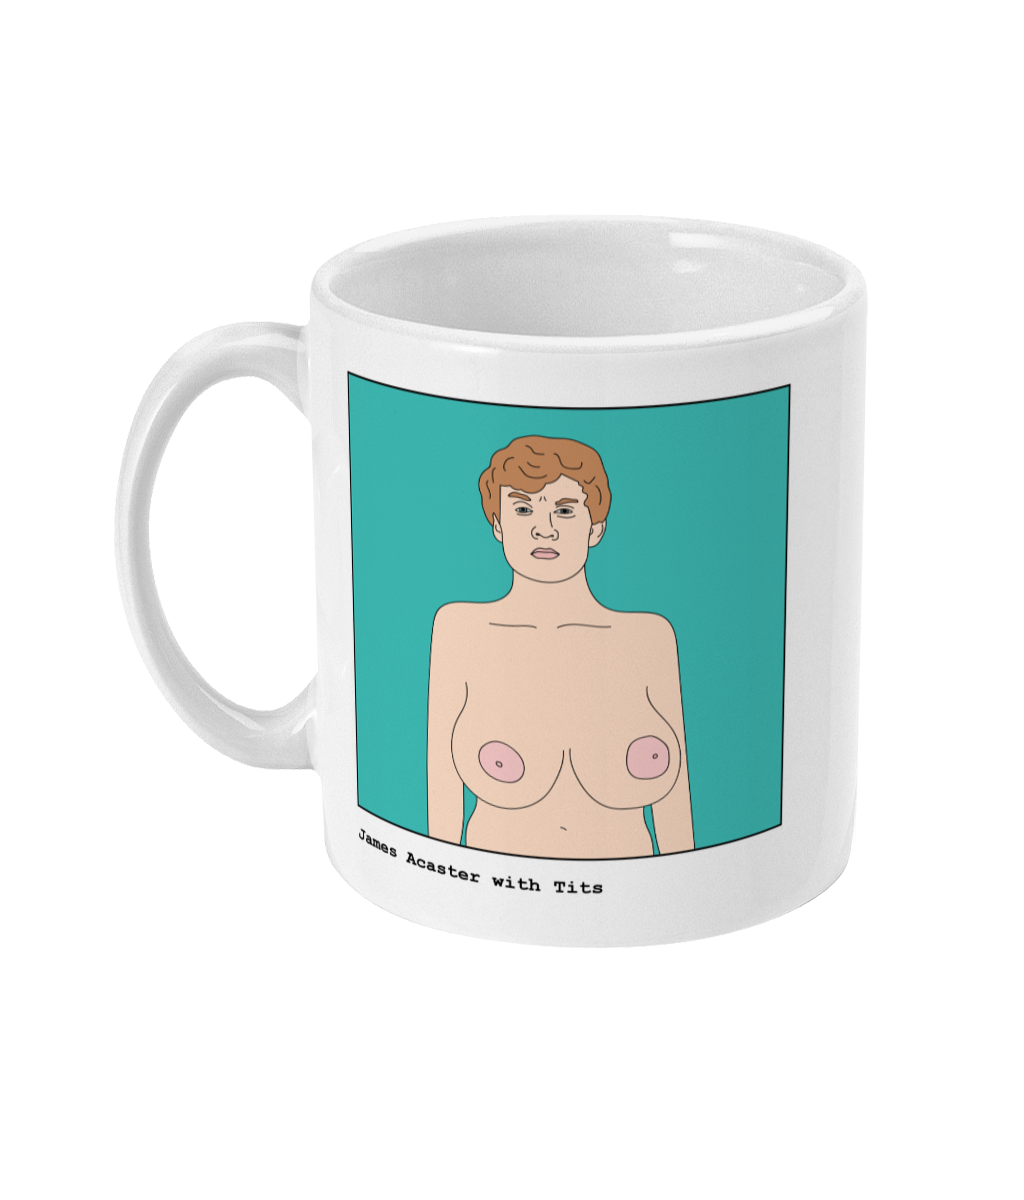 James Acaster with Tits